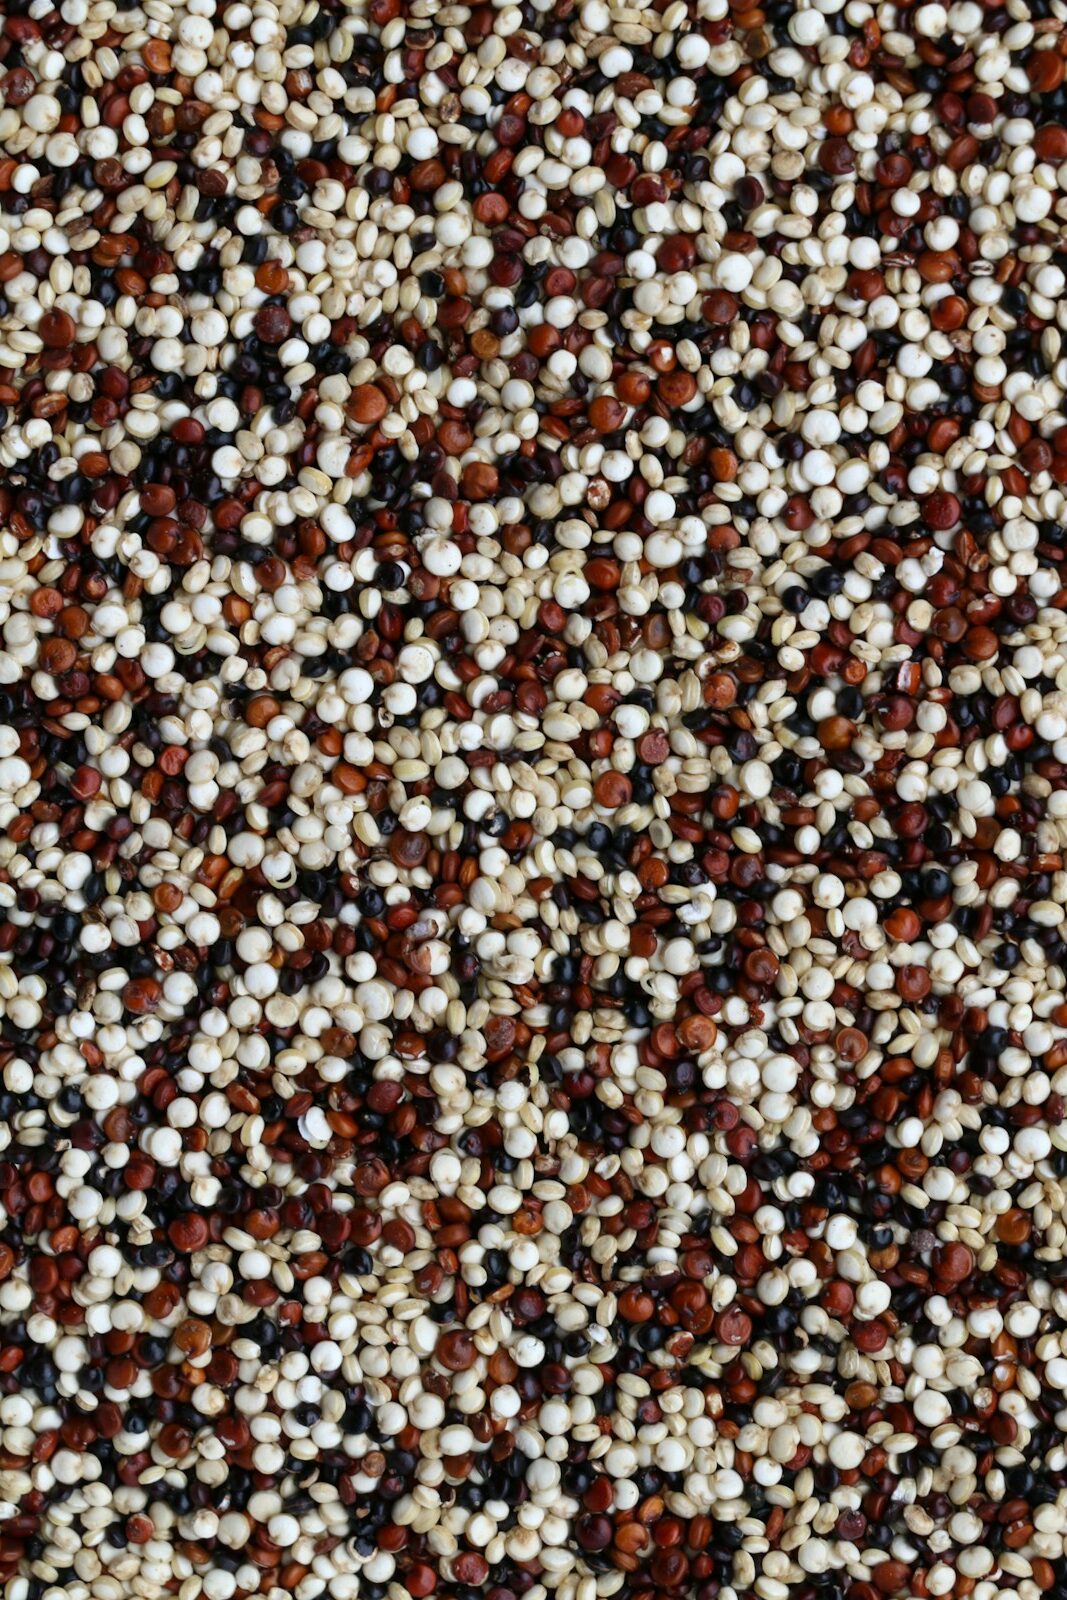 brown and white pebbles on ground